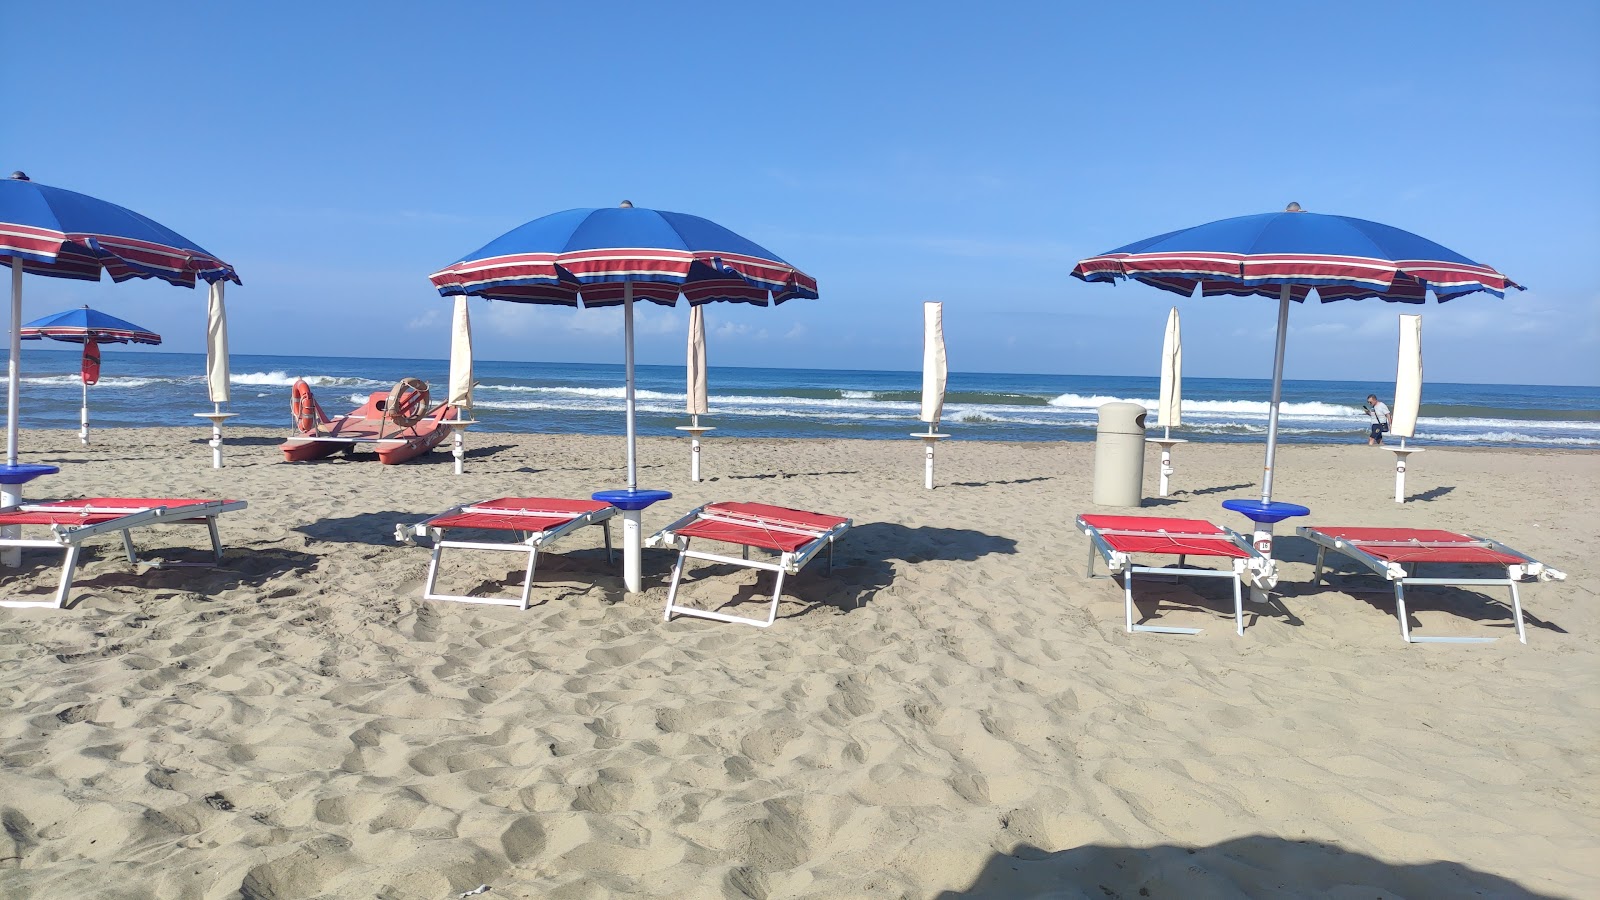 Photo of Spiaggia di Mondragone - recommended for family travellers with kids